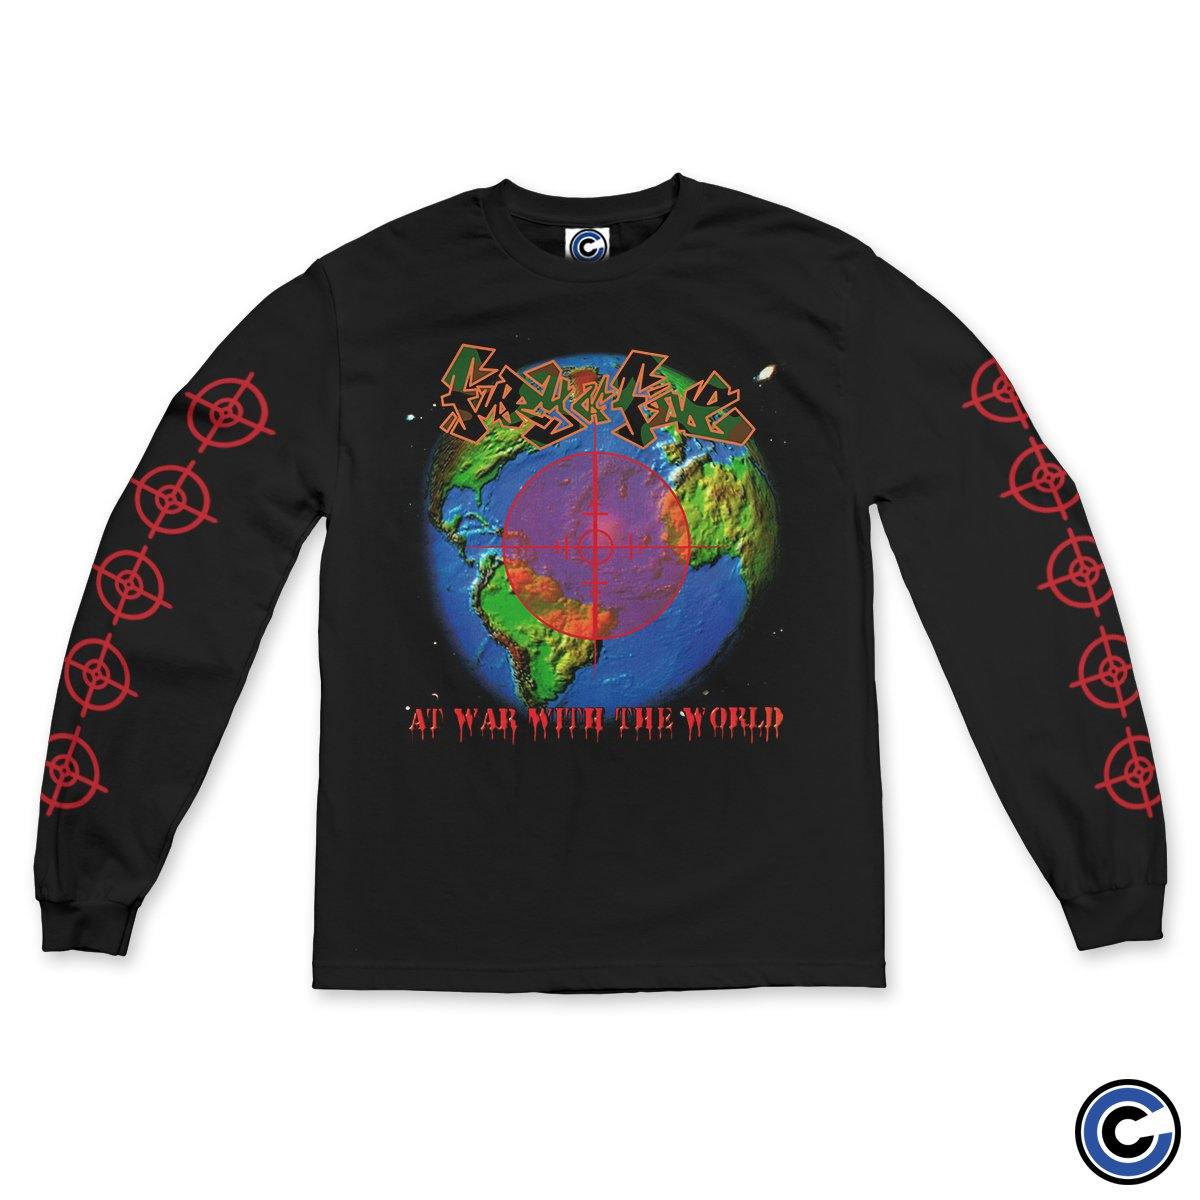 Buy – Fury of Five "At War With The World" Long Sleeve – Band & Music Merch – Cold Cuts Merch